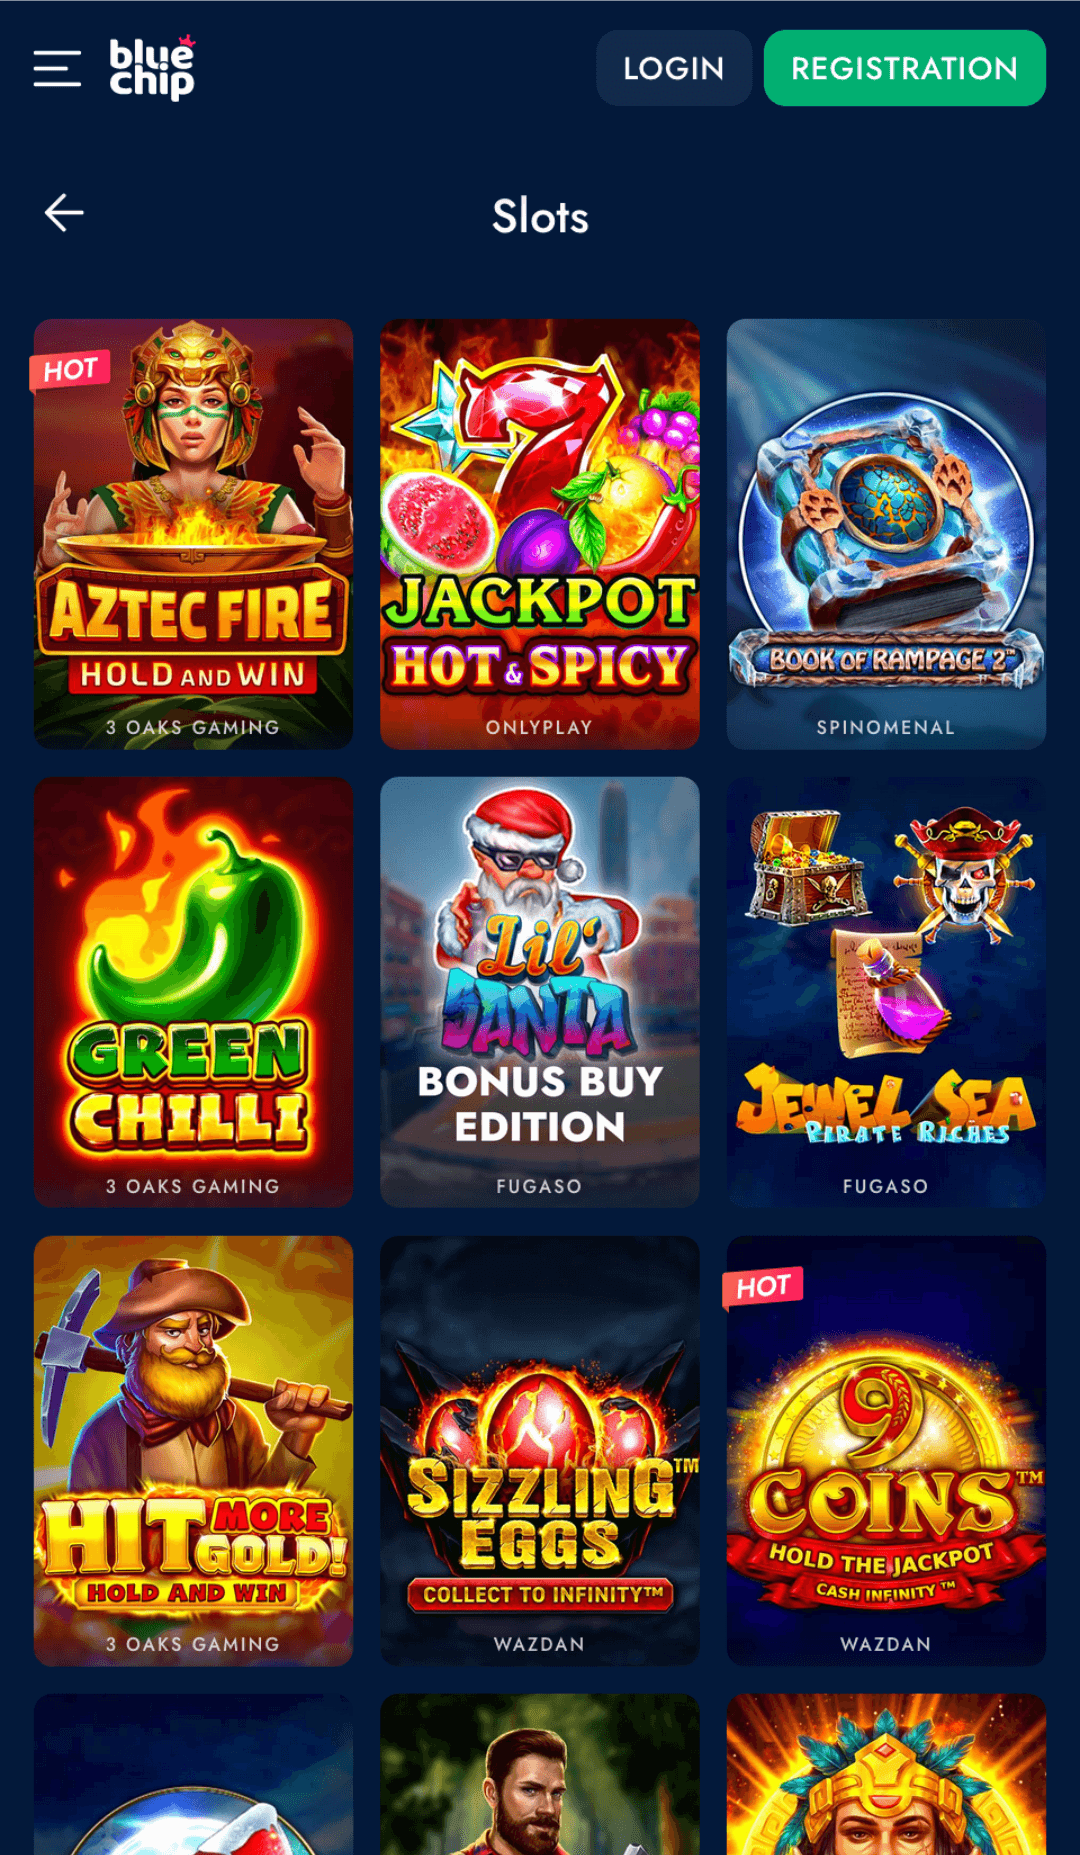 There are hundreds of different slots available to Indian users in the Bluechip app